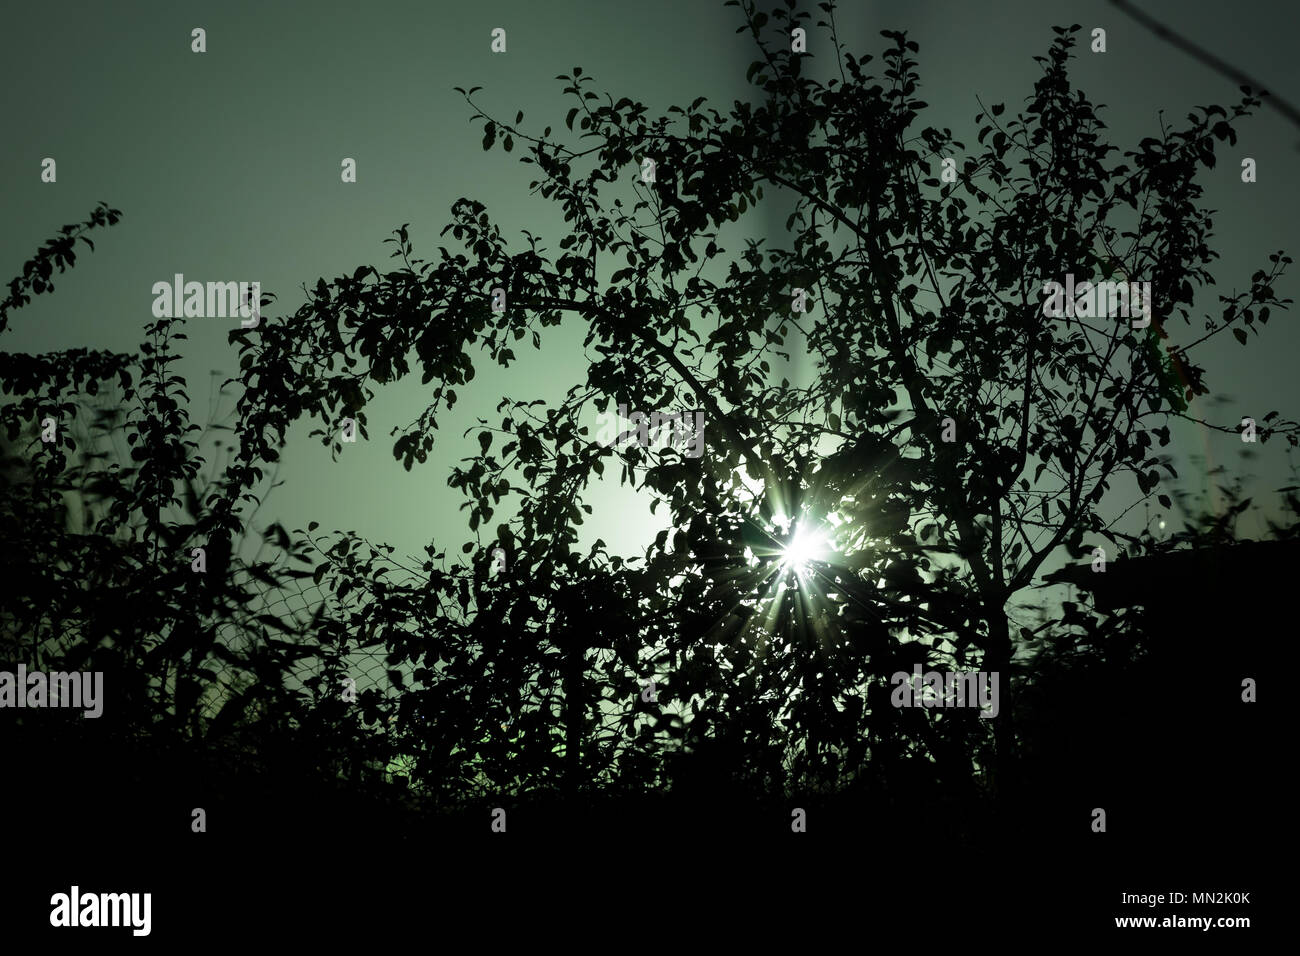 light breaks through the branches of a tree at night Stock Photo